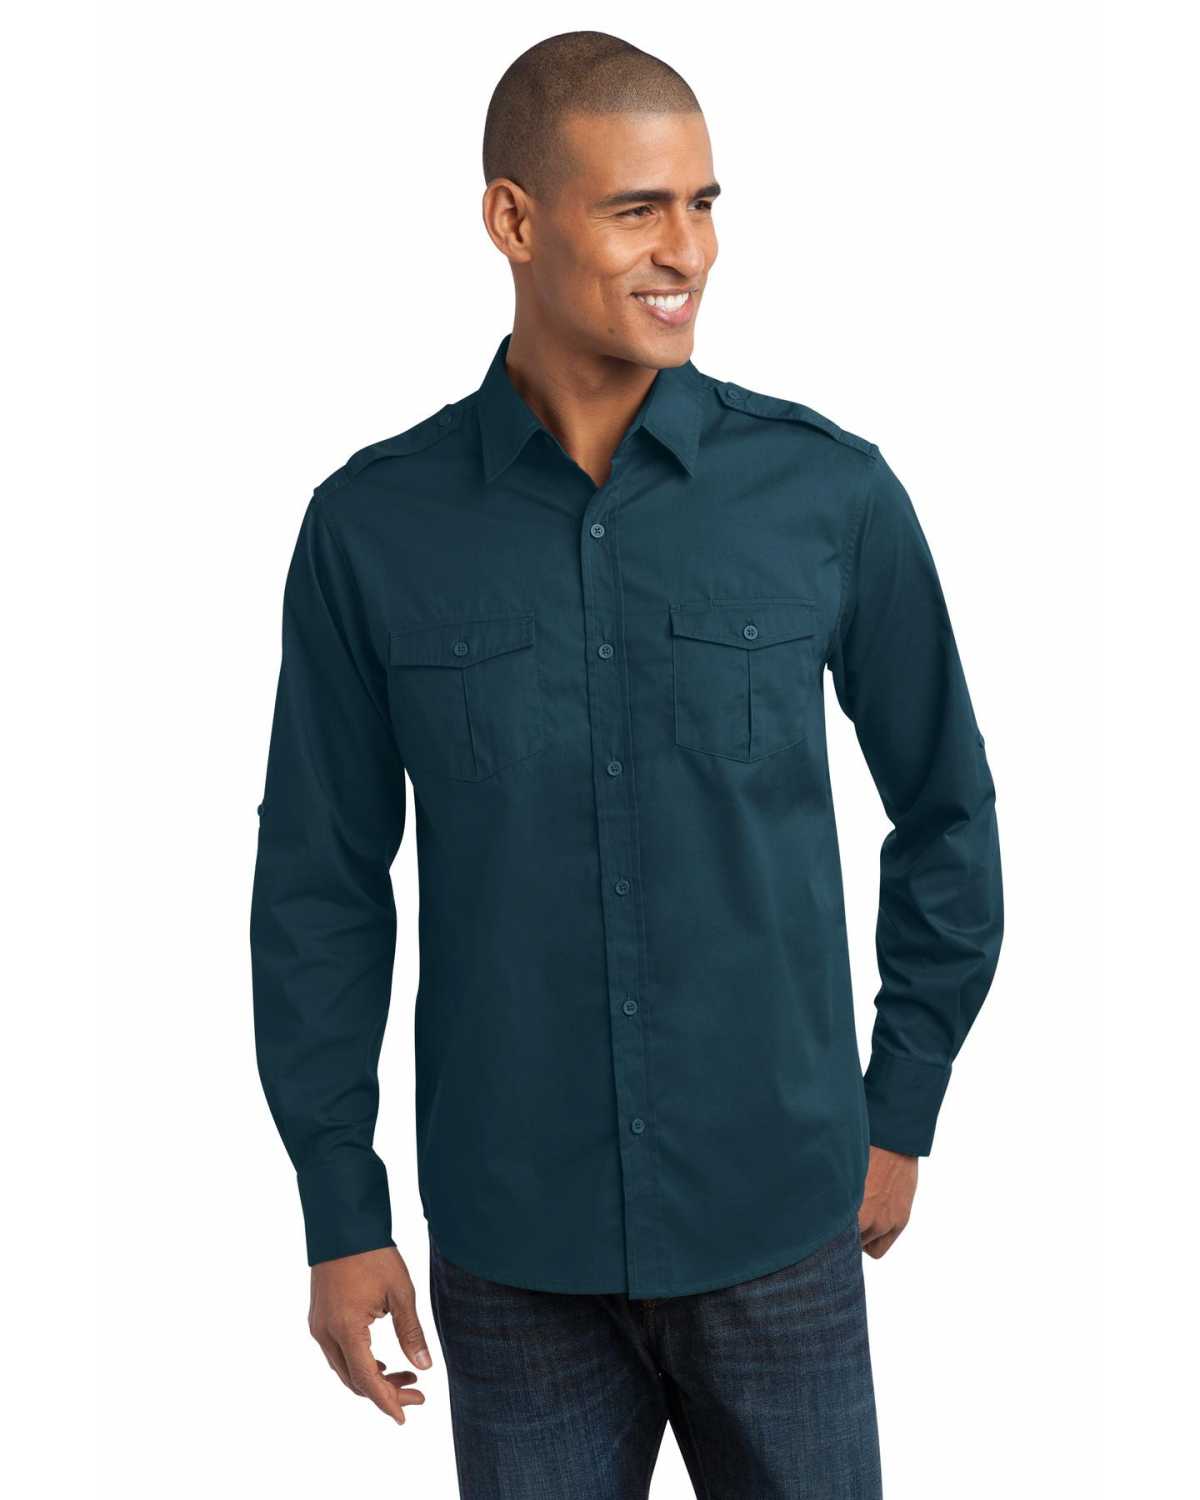 Port Authority S649 Stain-Release Roll Sleeve Twill Shirt on discount ...